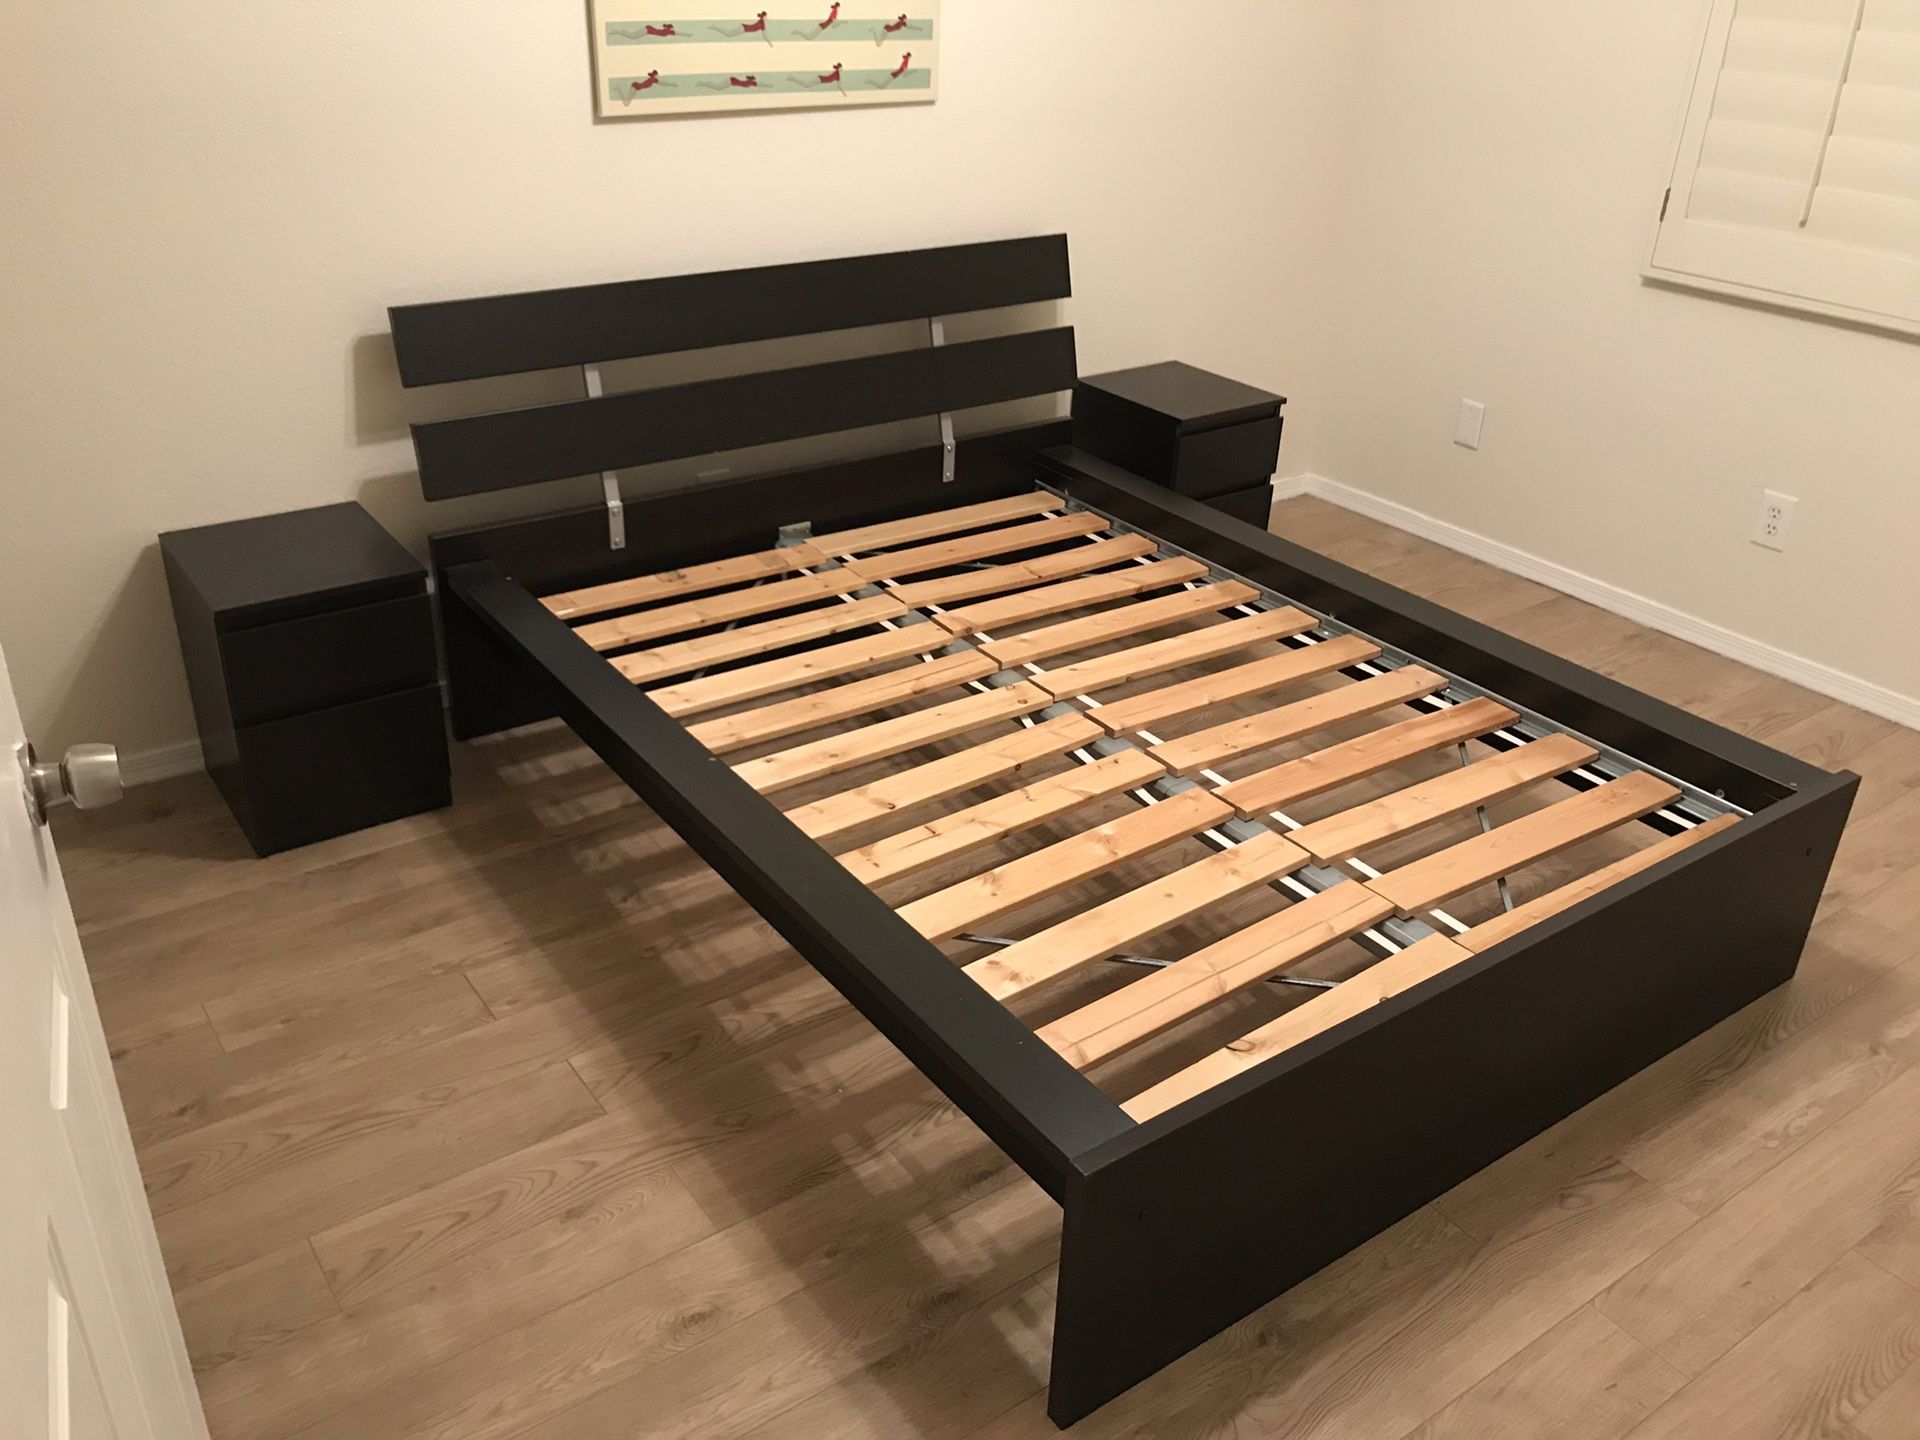 IKEA full bed and nightstands